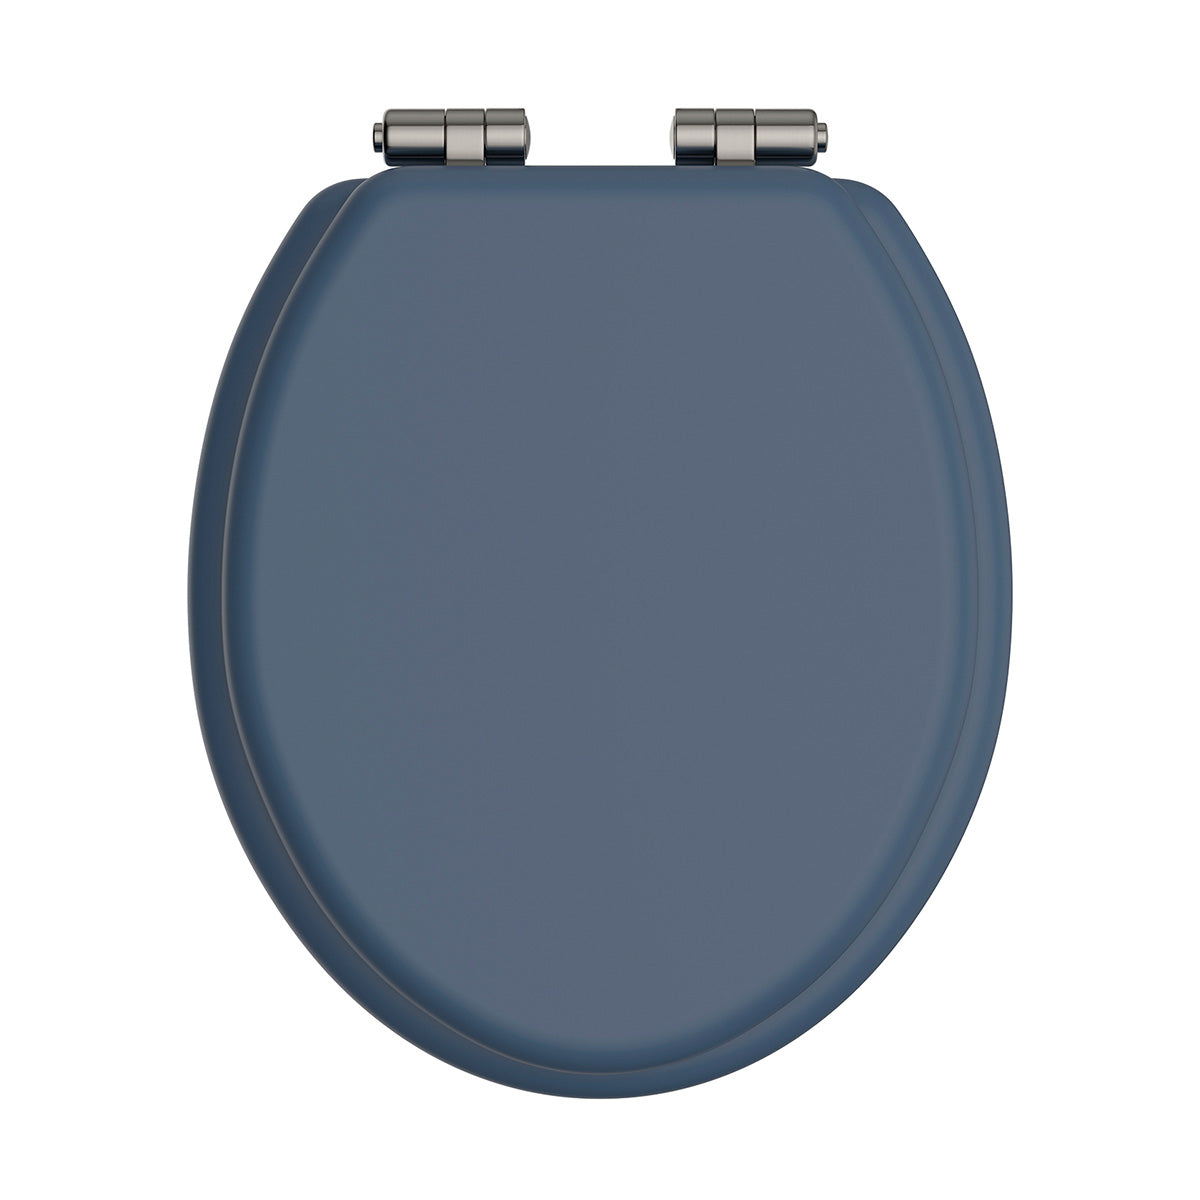 Heritage Traditional Toilet Seat With Soft Close Brushed Nickel Hinges Maritime Blue